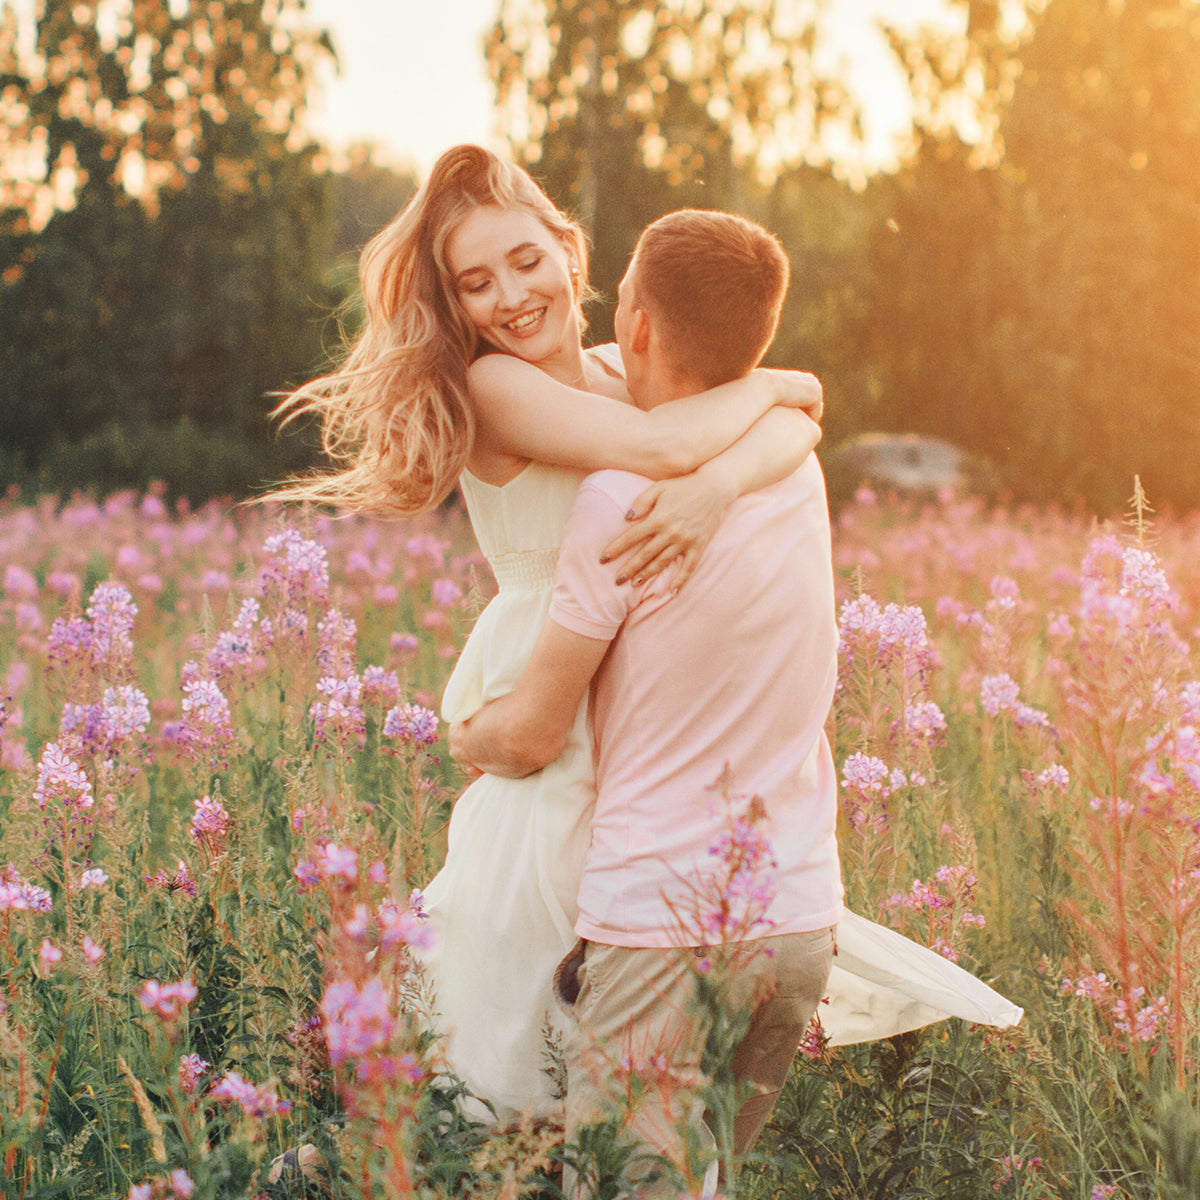 A couple embracing in a vibrant field of colorful flowers, enjoying the beauty of nature together.